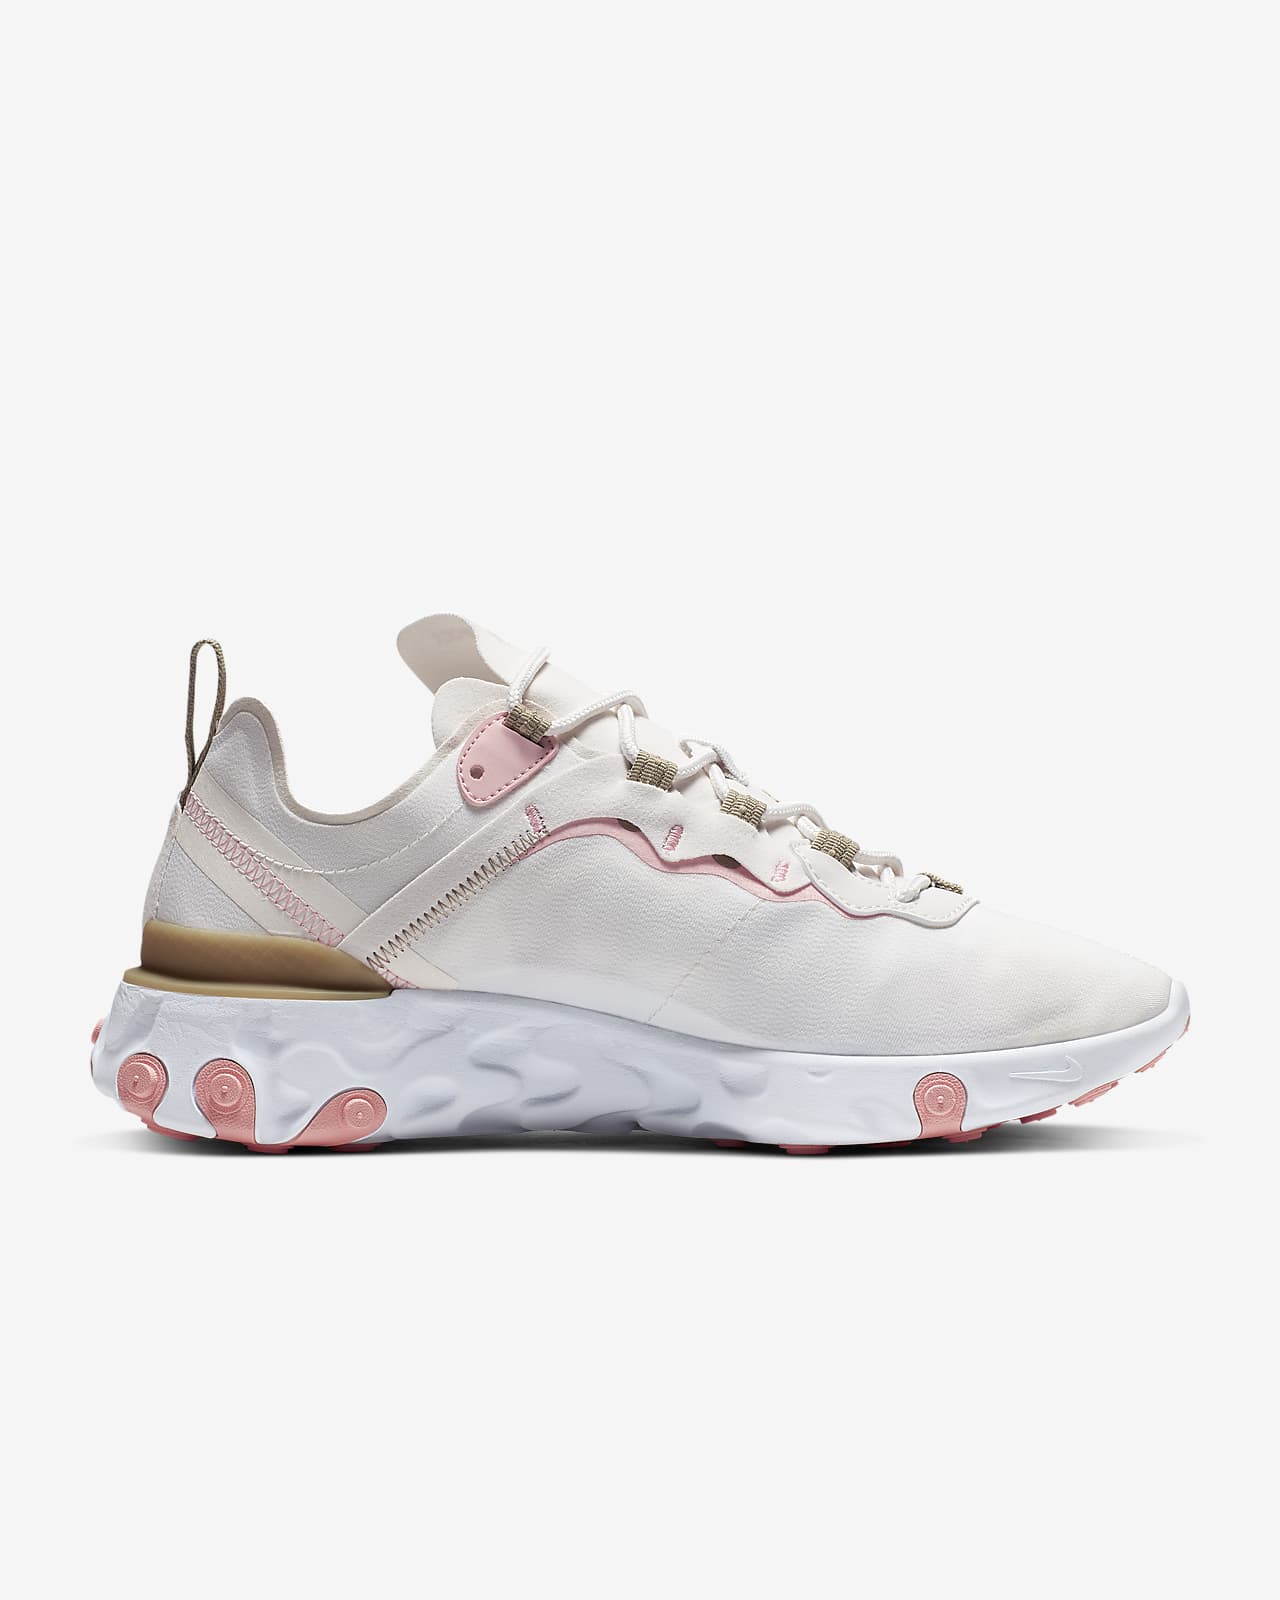 Chaussure Nike React Element 55 pour Femme